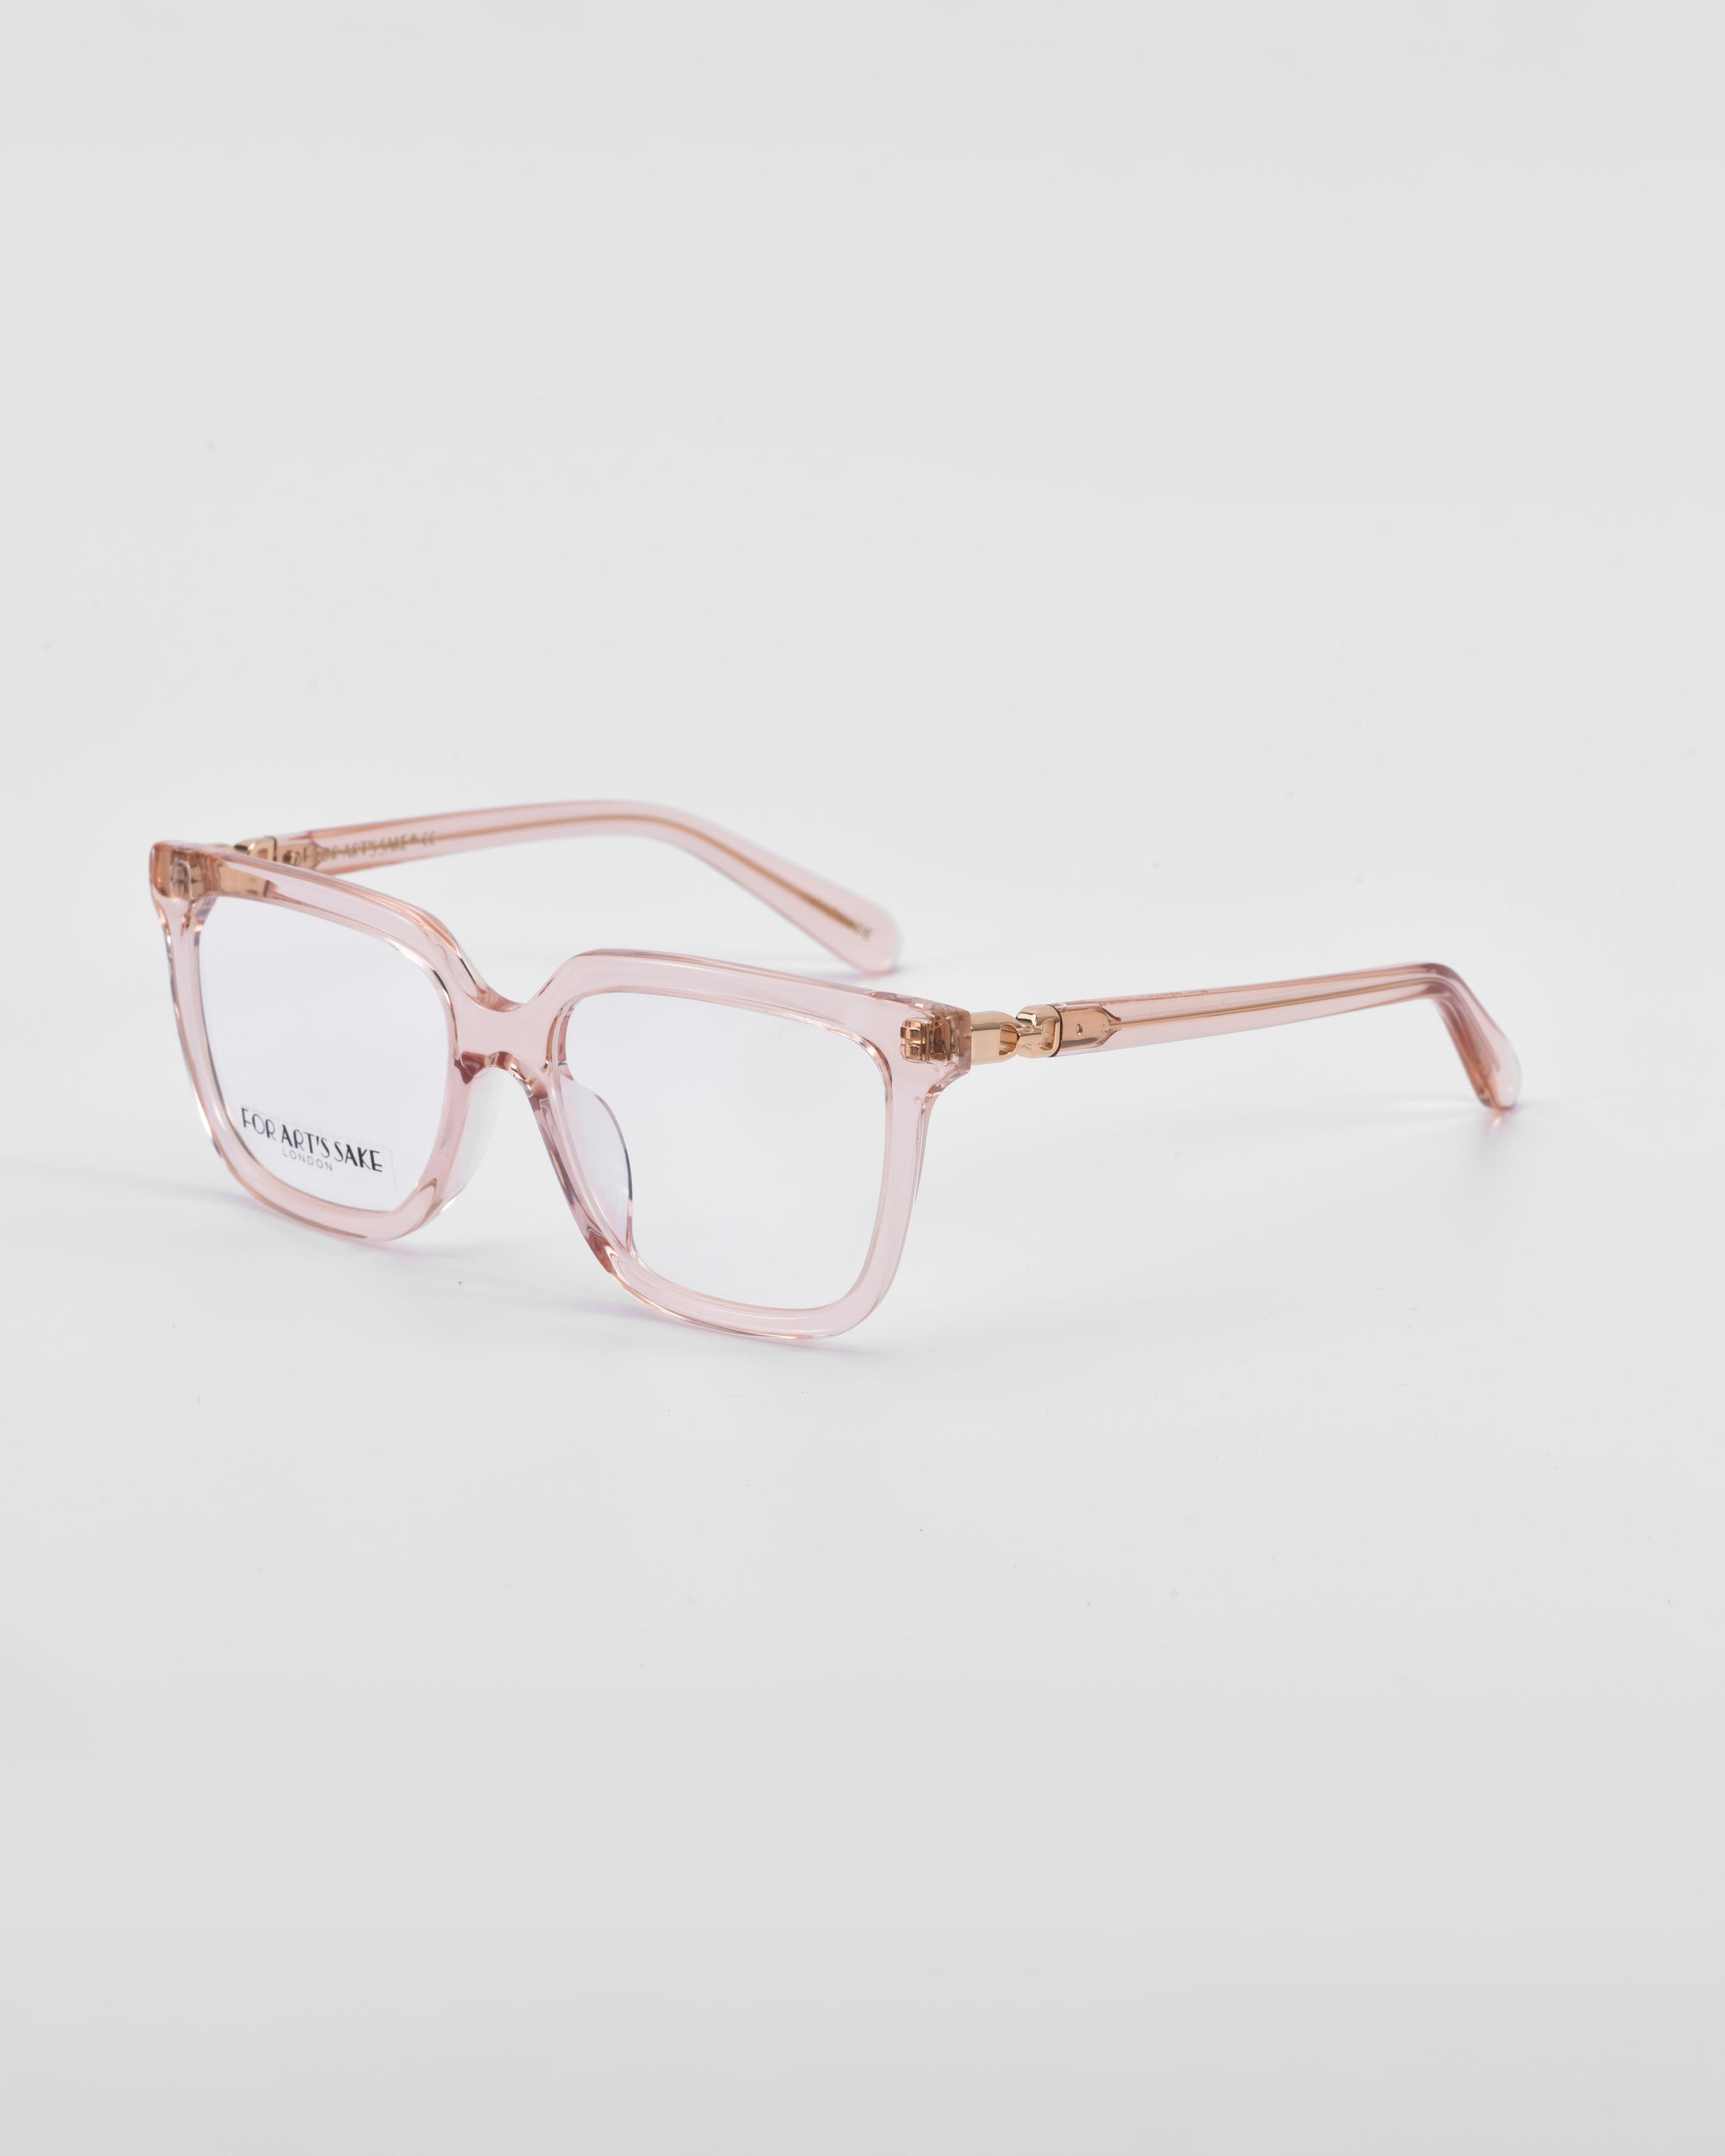 A pair of stylish square-framed eyeglasses with transparent pink frames sits on a plain white background. The classic square silhouette is complemented by clear lenses and temples featuring subtle 18-karat gold hinges, adding a touch of elegance to the Nina by For Art&#39;s Sake®.